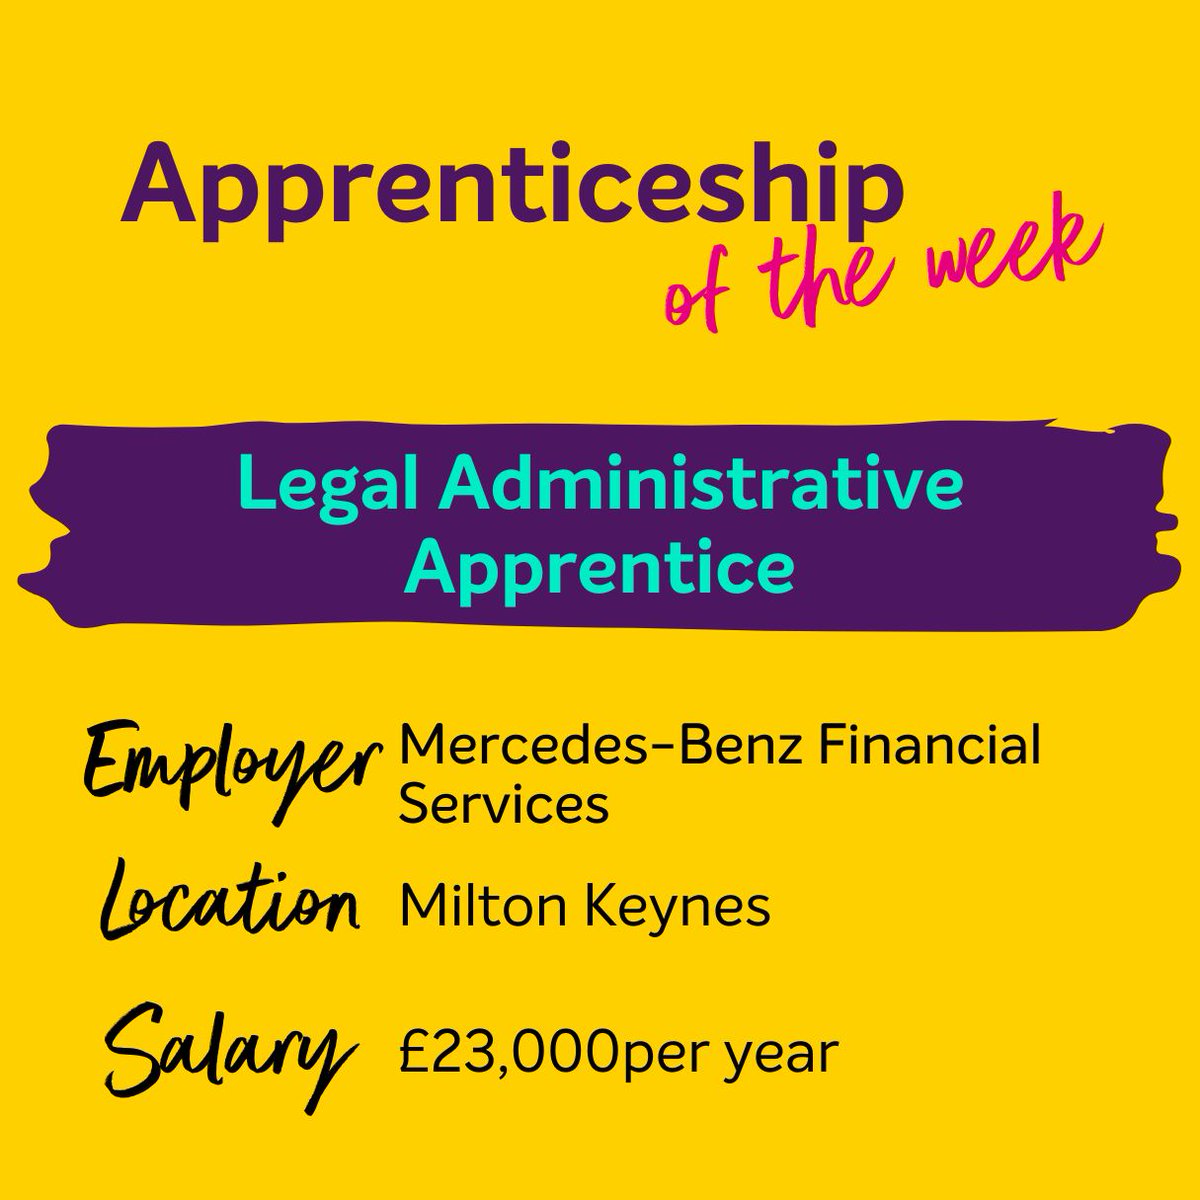 ⭐ Apprenticeship of the week ⭐ To see a full list of our current vacancies or to apply please visit: bit.ly/3T6lixL #Apprenticeships #SkillsForLife #MiltonKeynes #Applynow